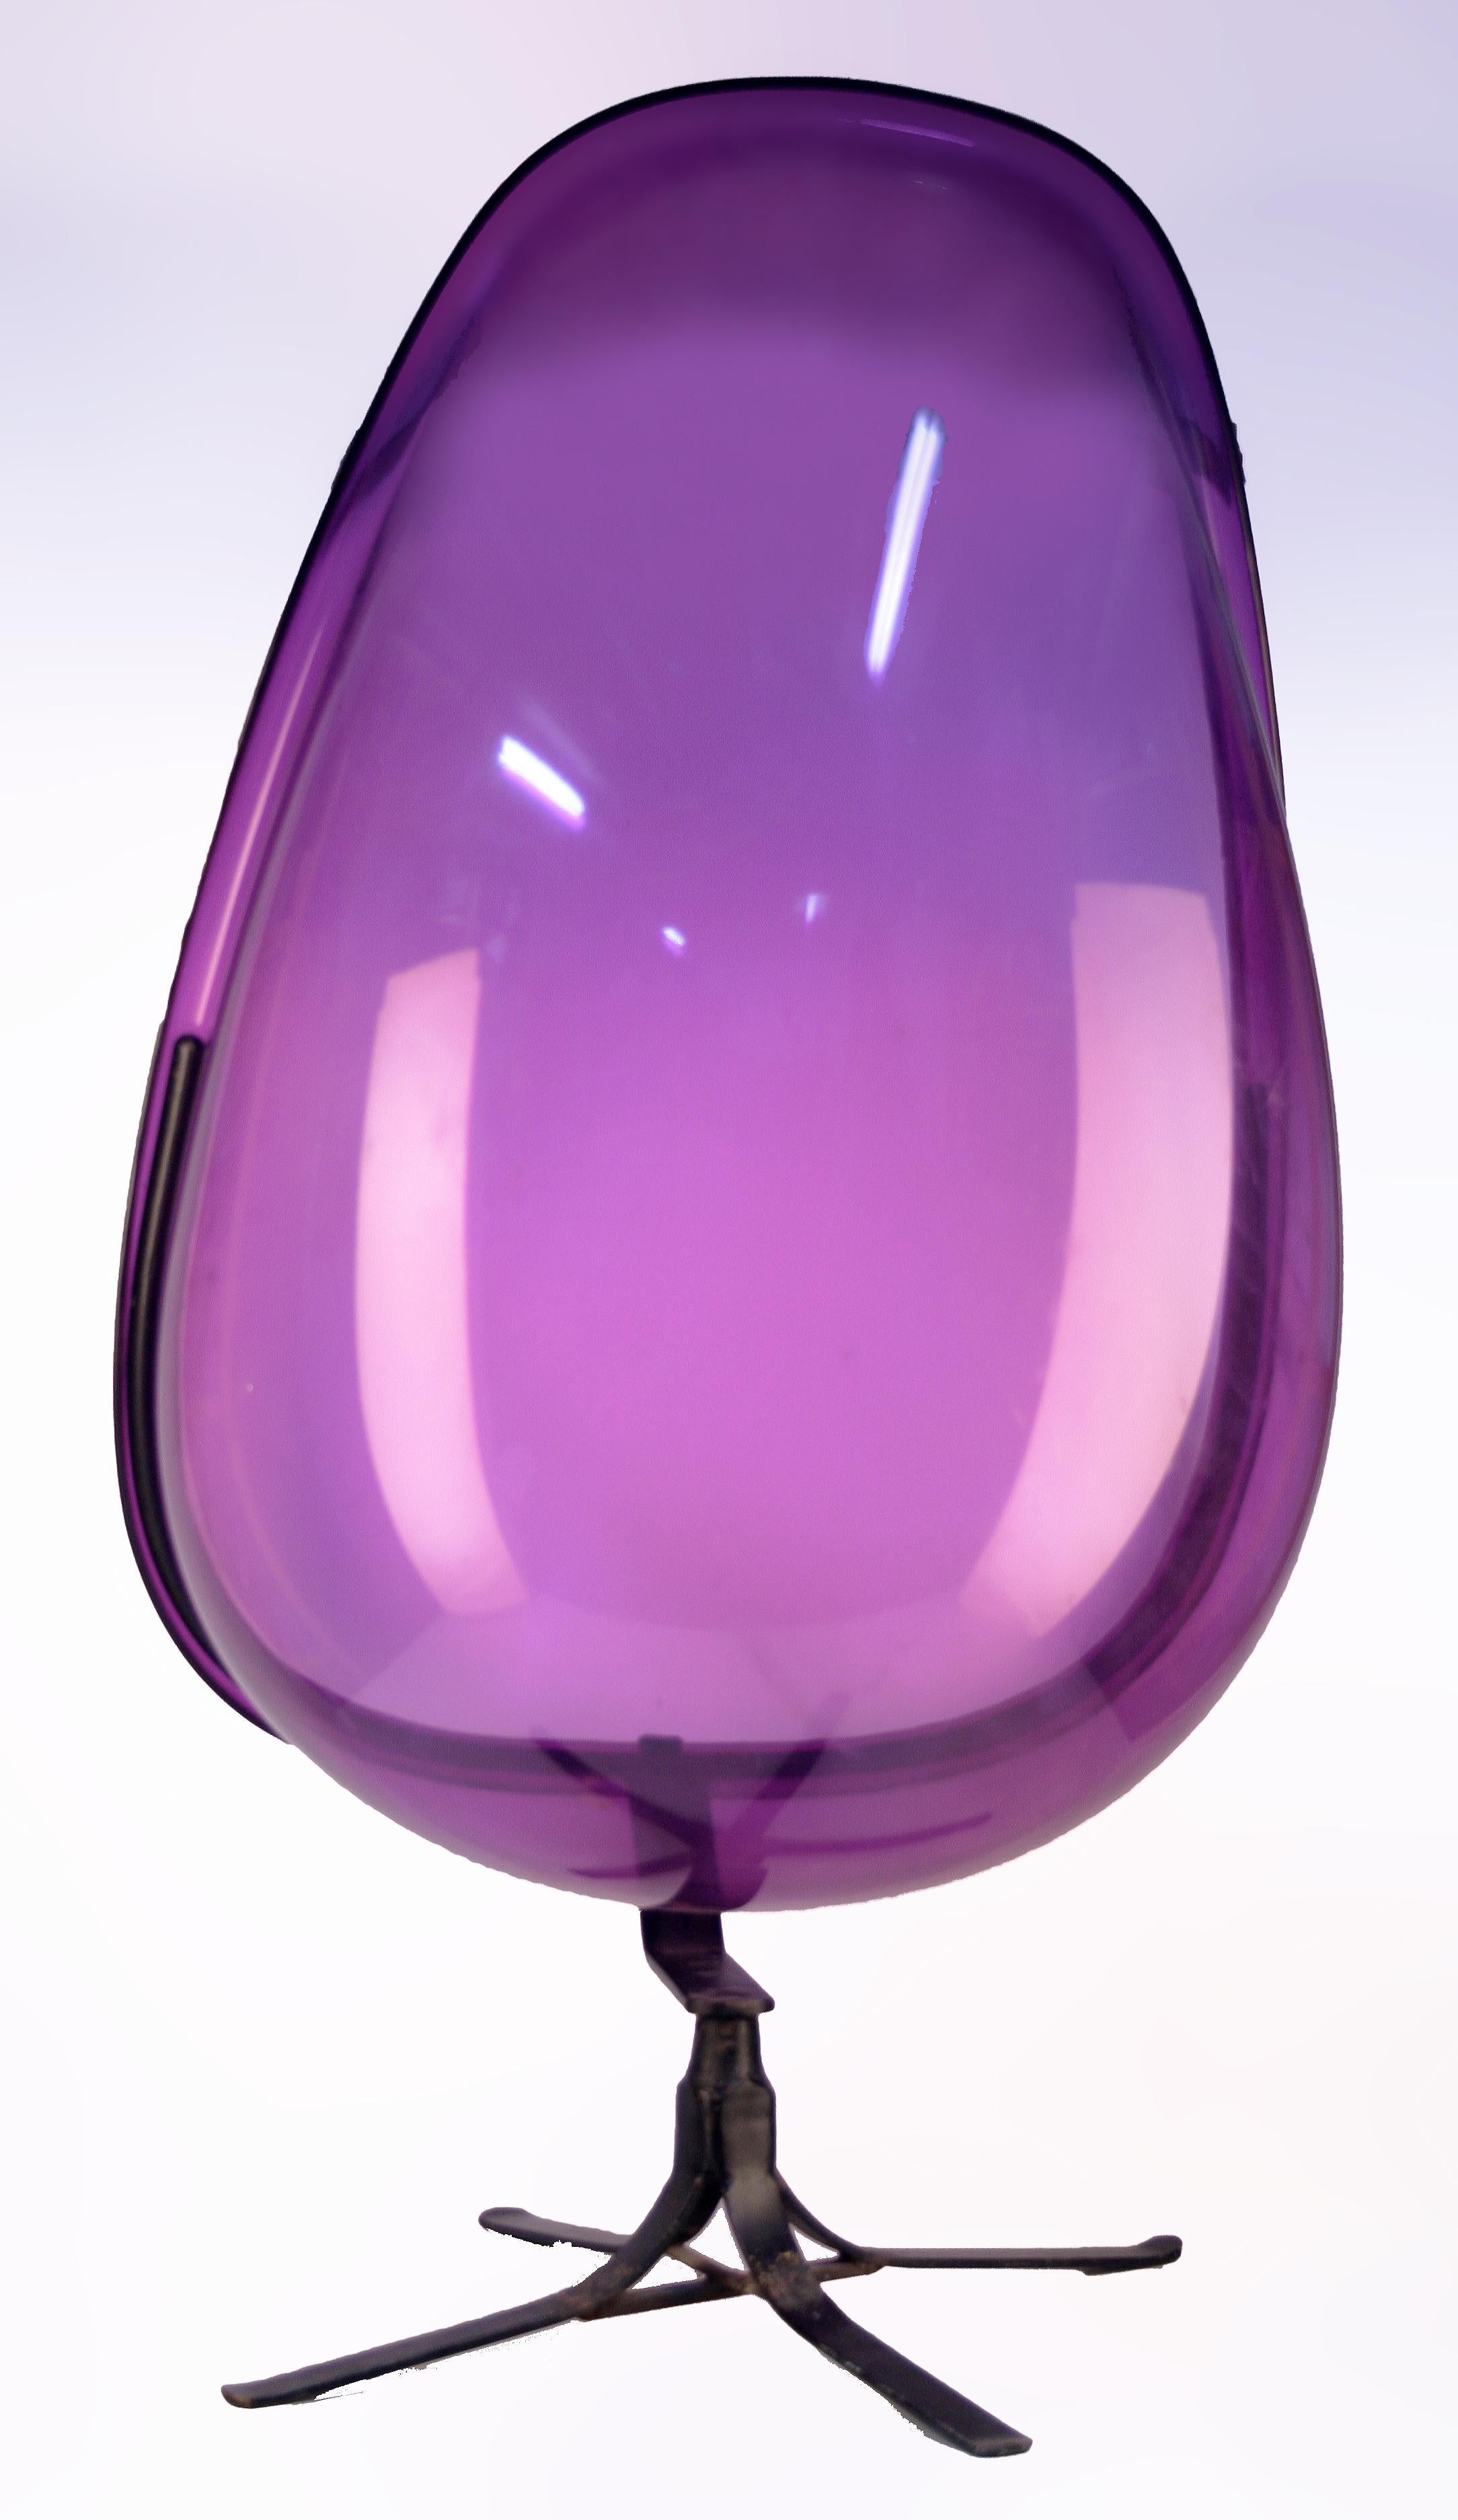 Space Age Mid-20th C. Modern American Egg Shaped Acrylic Purple Chair with Iron Legs For Sale